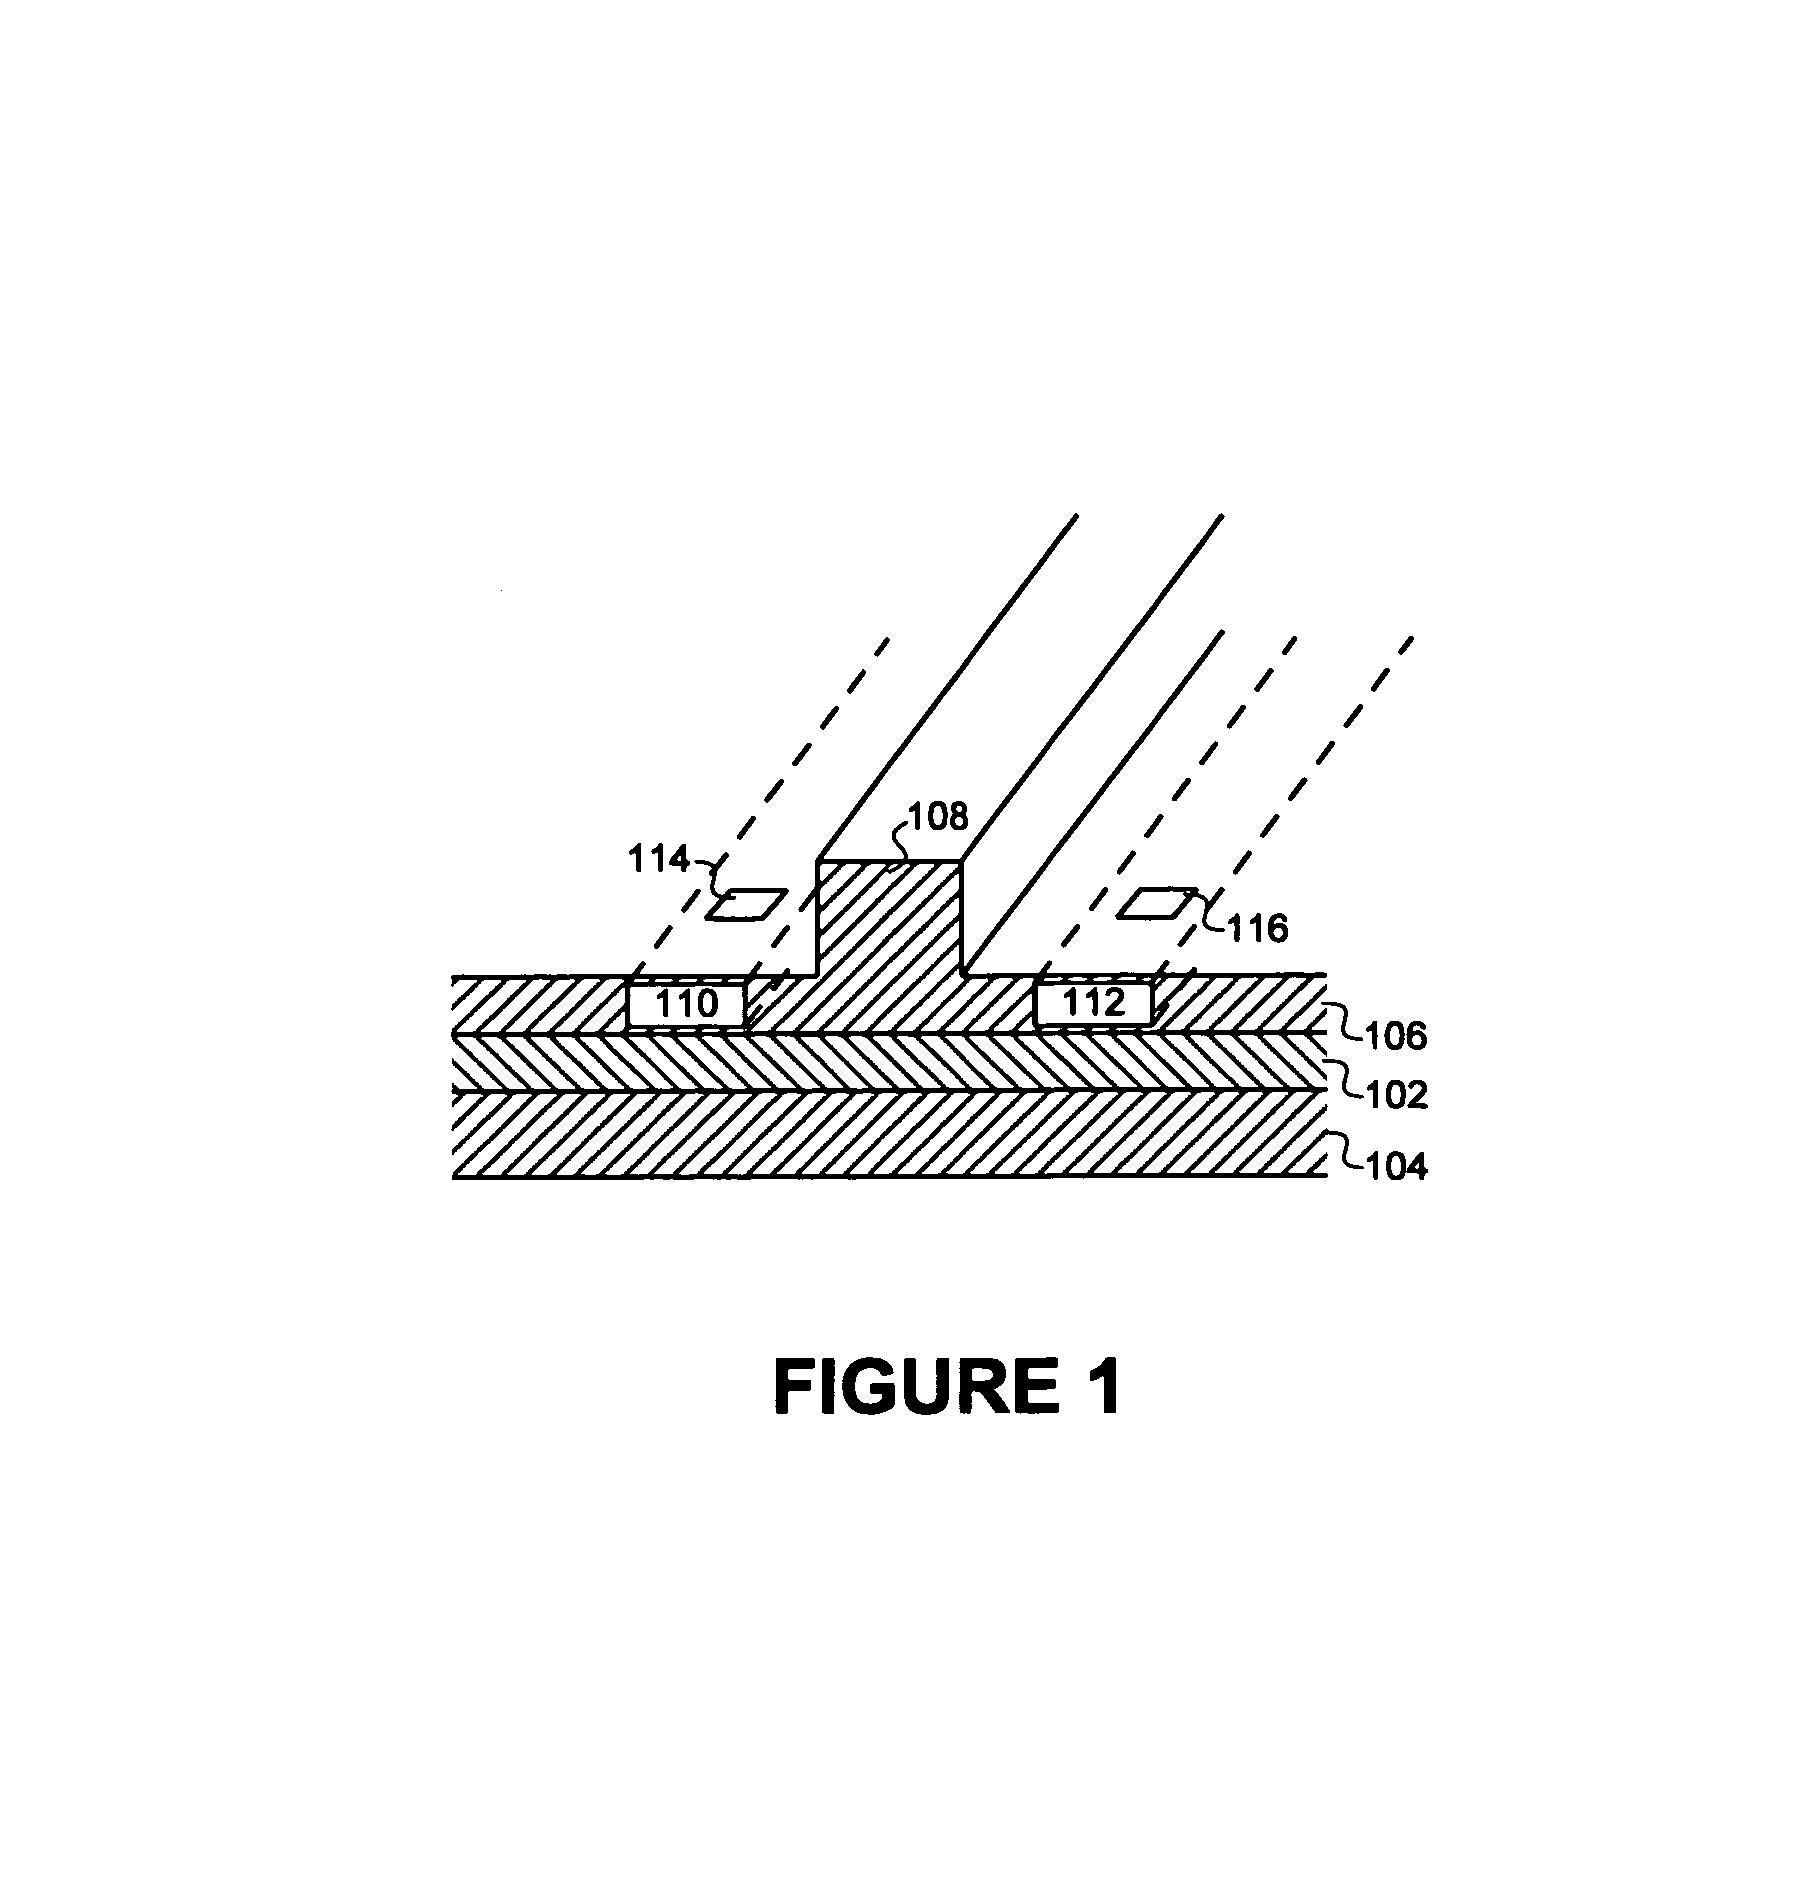 Method to realize fast silicon-on-insulator (SOI) optical device